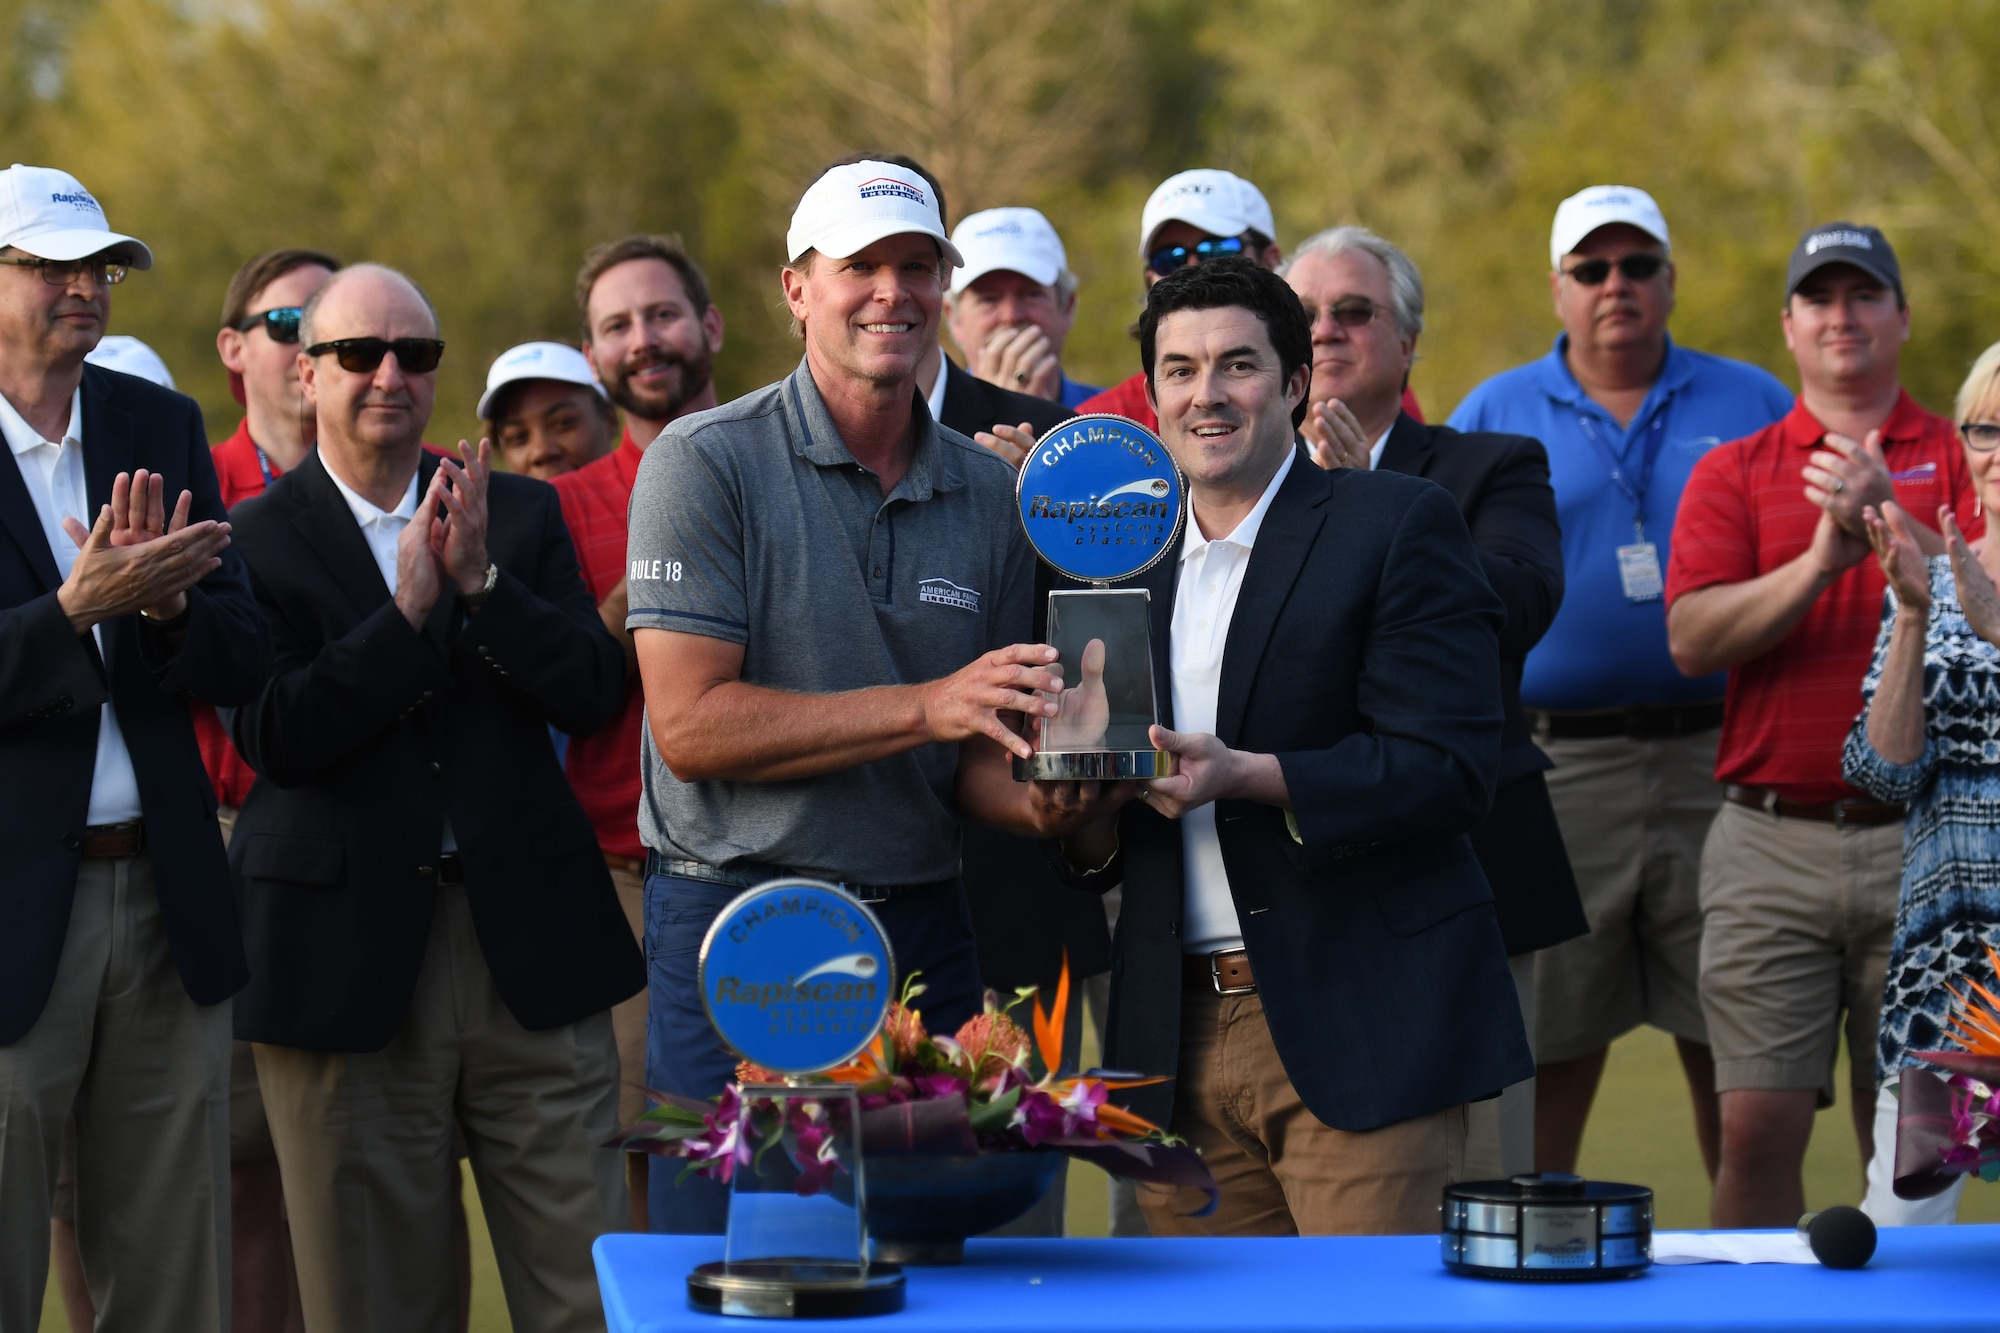 Jonathan Jones, Rapiscan Systems Classic president, presents the trophy to Steve Stricker, Professional Golfers’ Association golfer, after winning the Rapiscan Systems Classic Champions Tour at Fallen Oak Golf Club March 25, 2018, in Saucier, Mississippi. Keesler personnel performed the national anthem and presented the colors during the closing ceremony of the three-day event. (U.S. Air Force photo by Kemberly Groue)